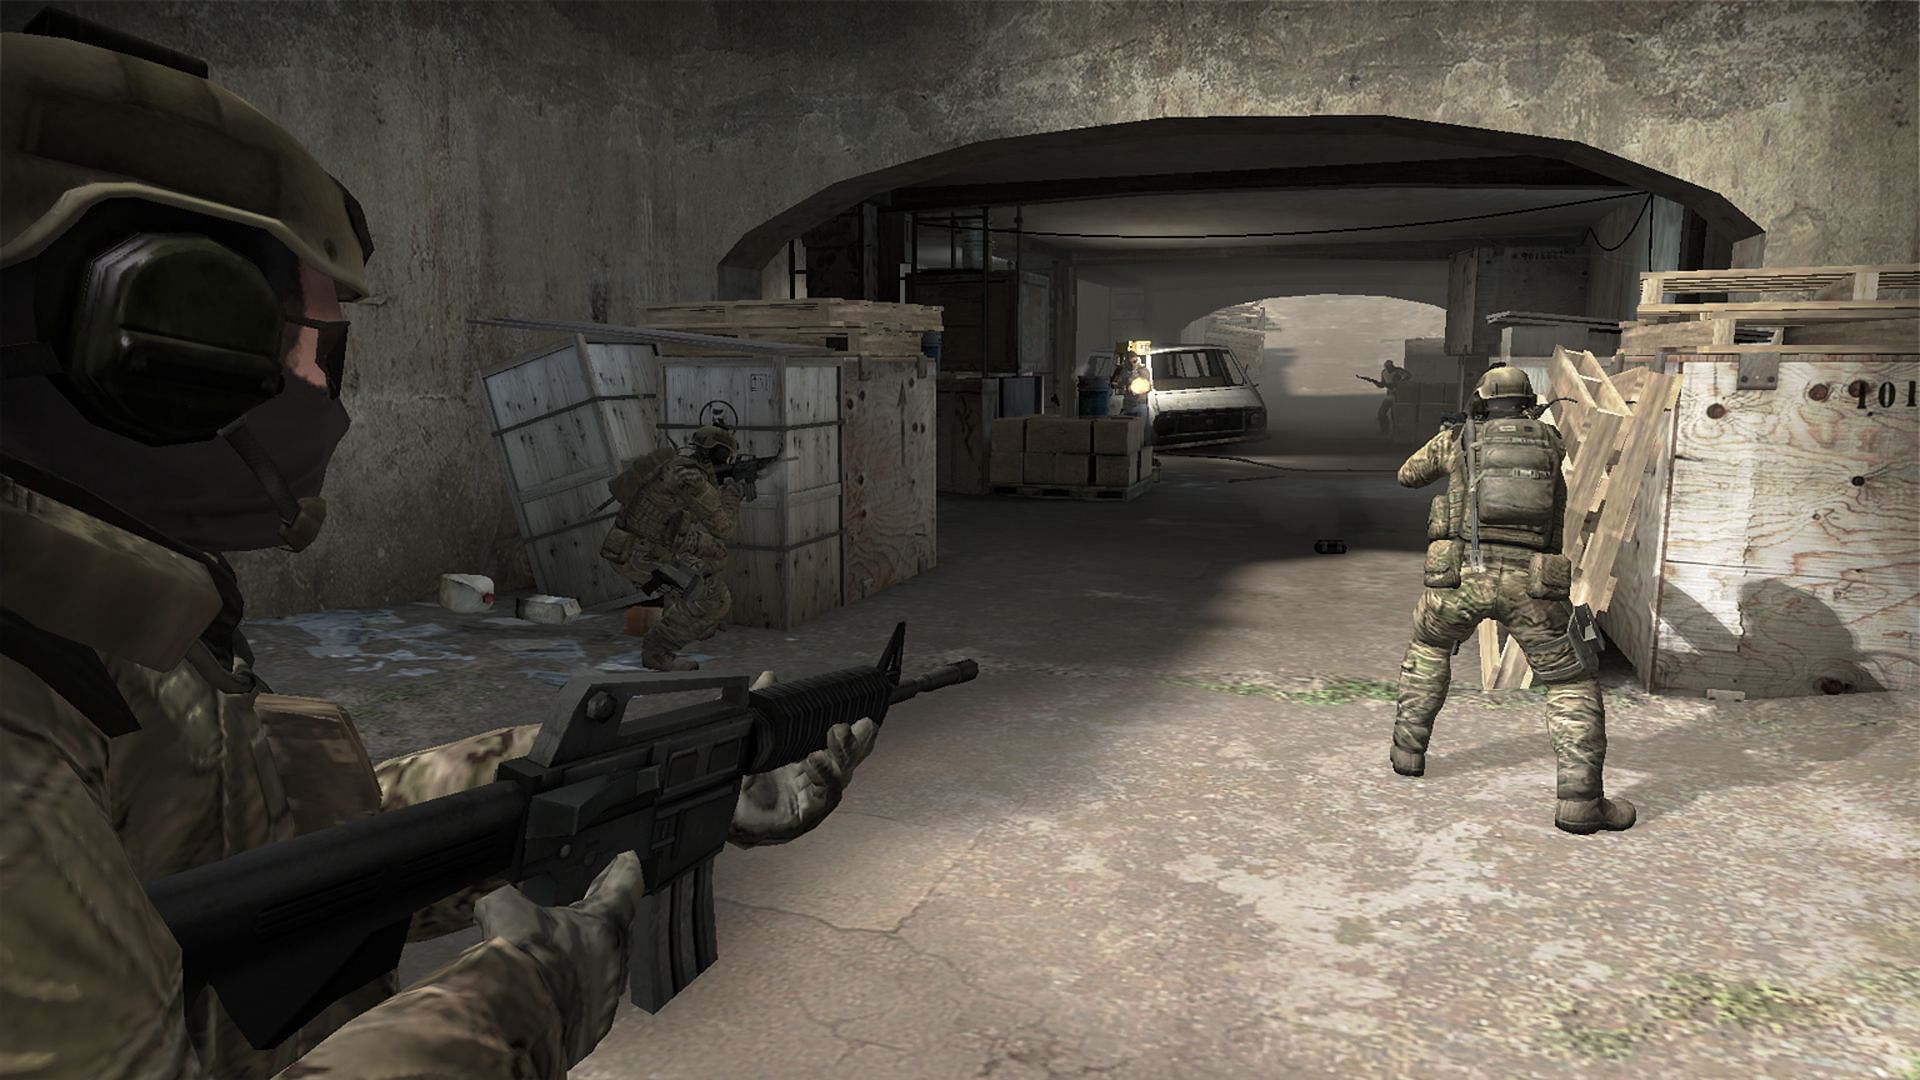 Counter-Strike 2 Confirmed For Summer 2023 Release, Limited Test Begins  Today - GameSpot